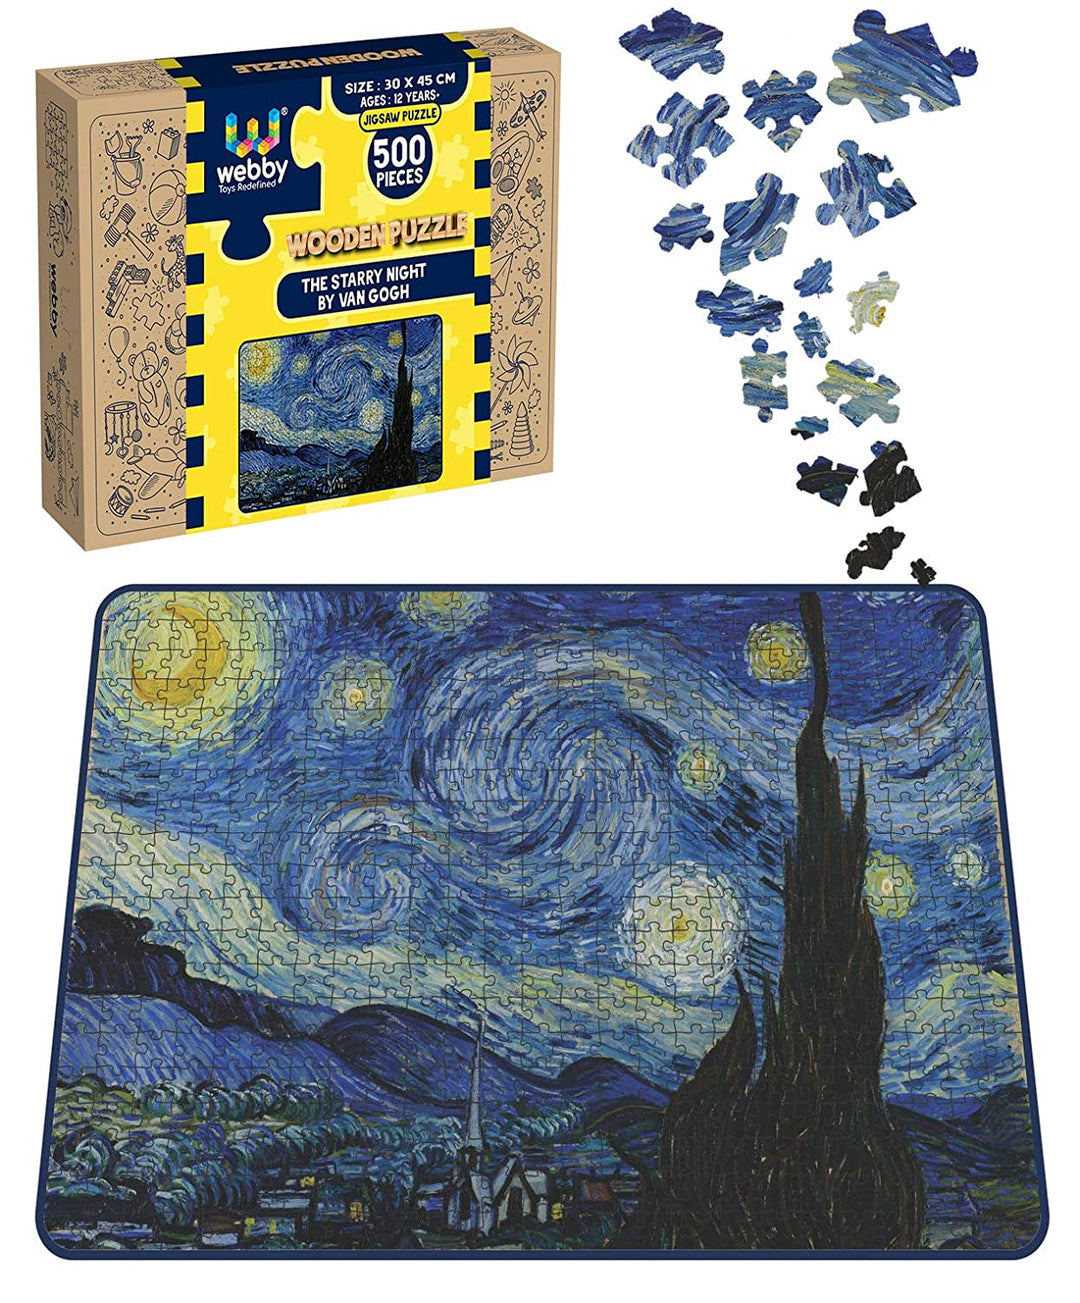 Webby The Starry Night by Van Gogh Wooden Jigsaw Puzzle, 500 pieces